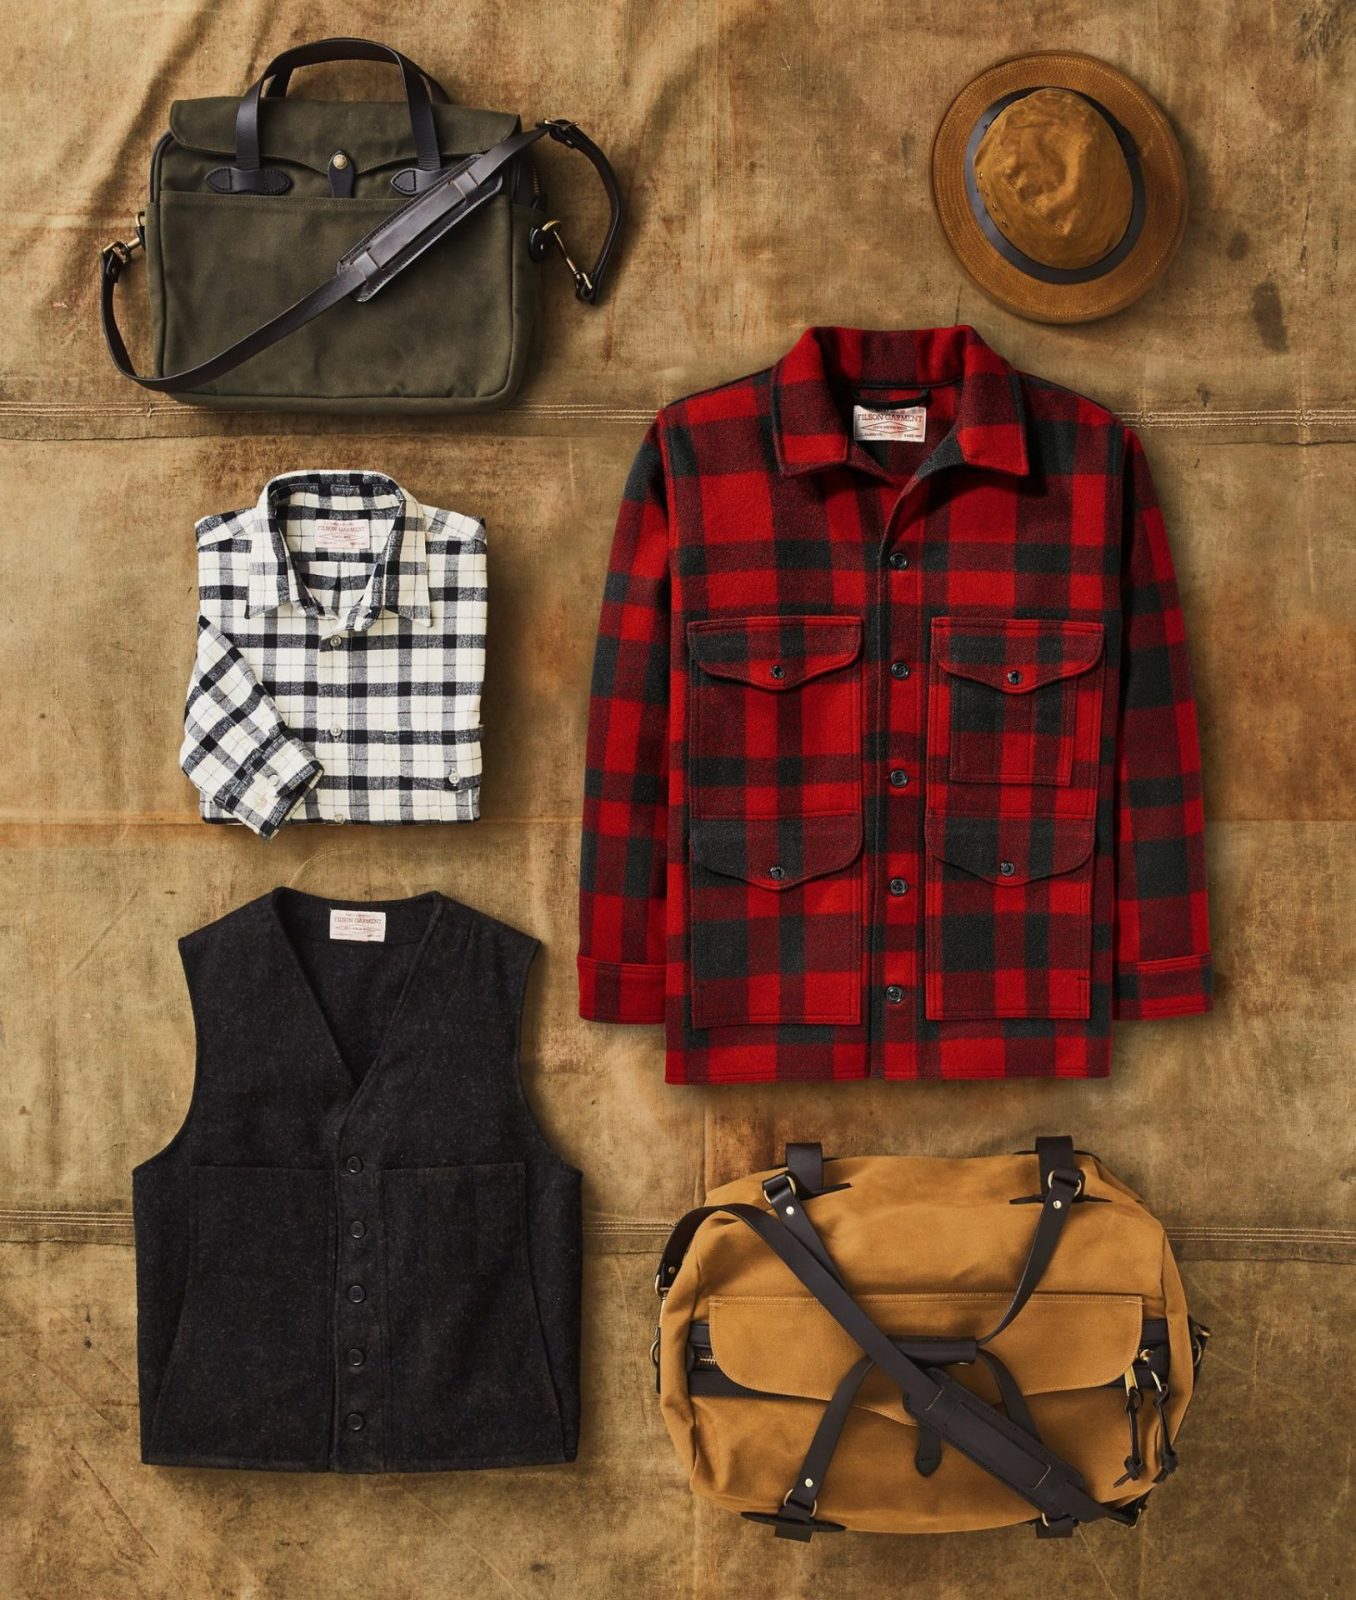 Filson to open first Canadian store in Gastown this Spring • urbanYVR